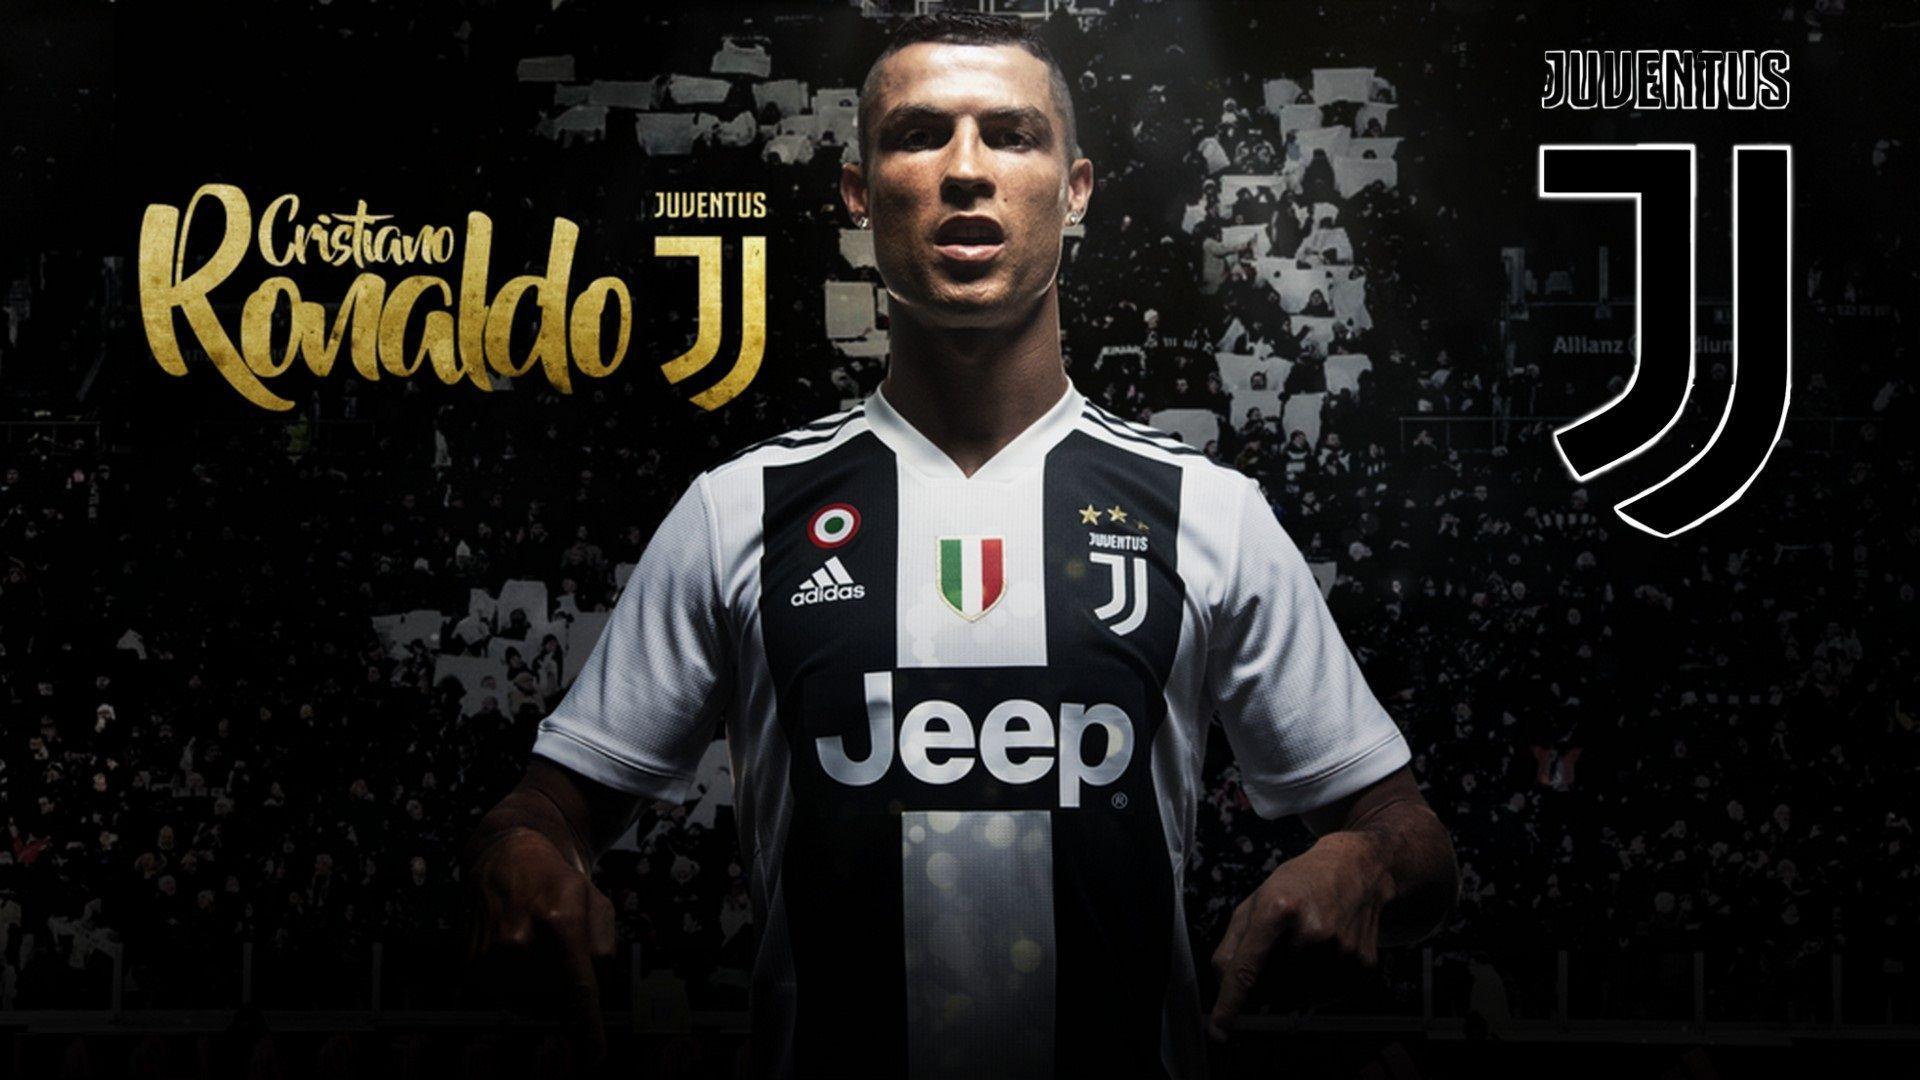 Cristiano Ronaldo in Juventus HD Wallpaper New Tab extension. This